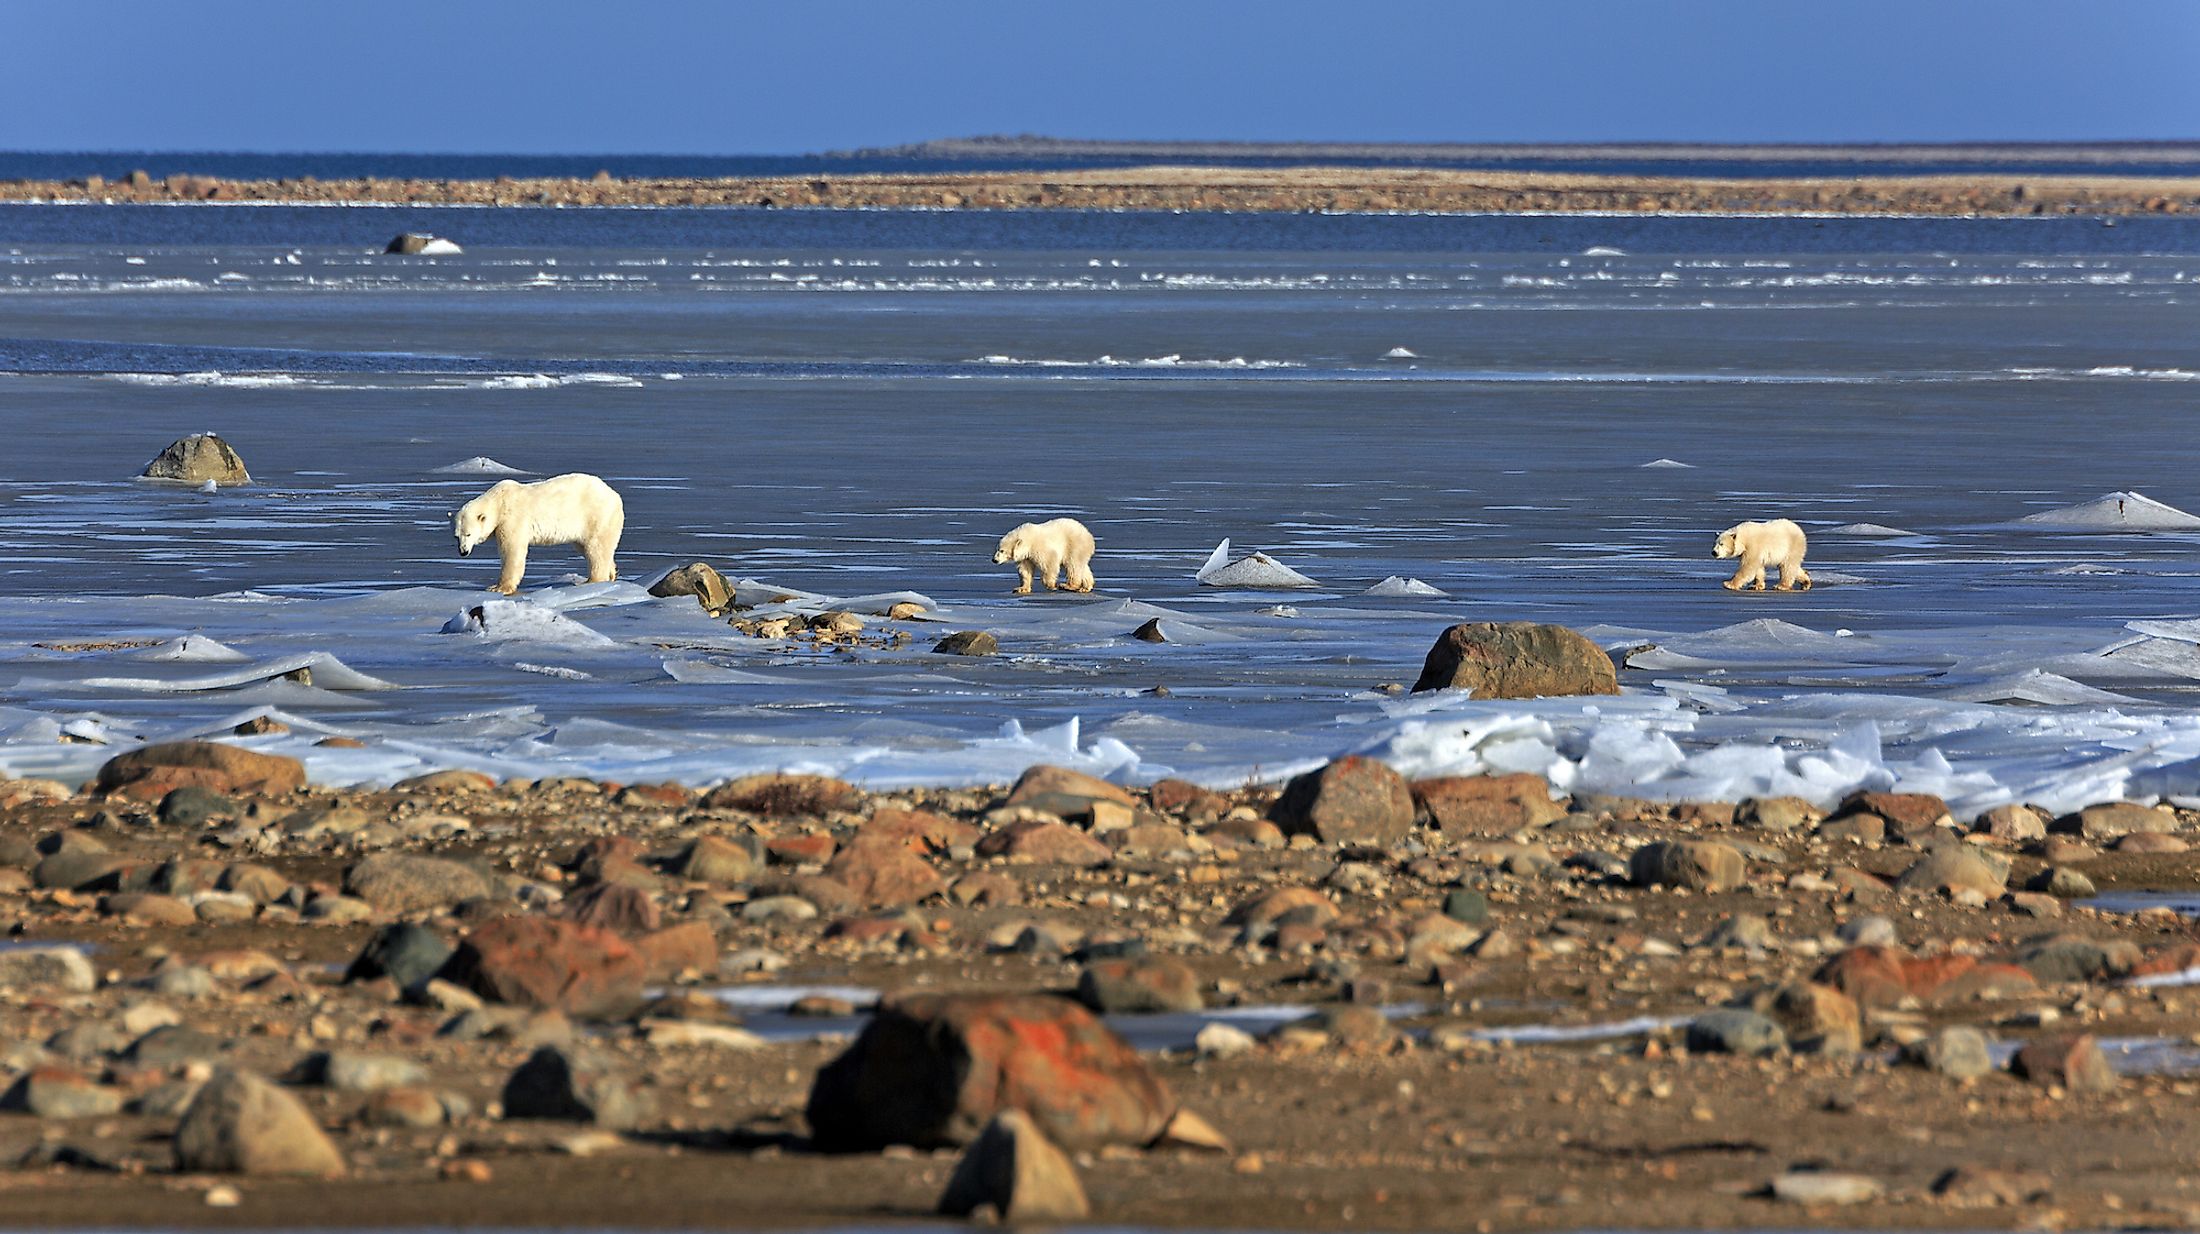 A polar bear family on the ice of the Hudson bay in Canada